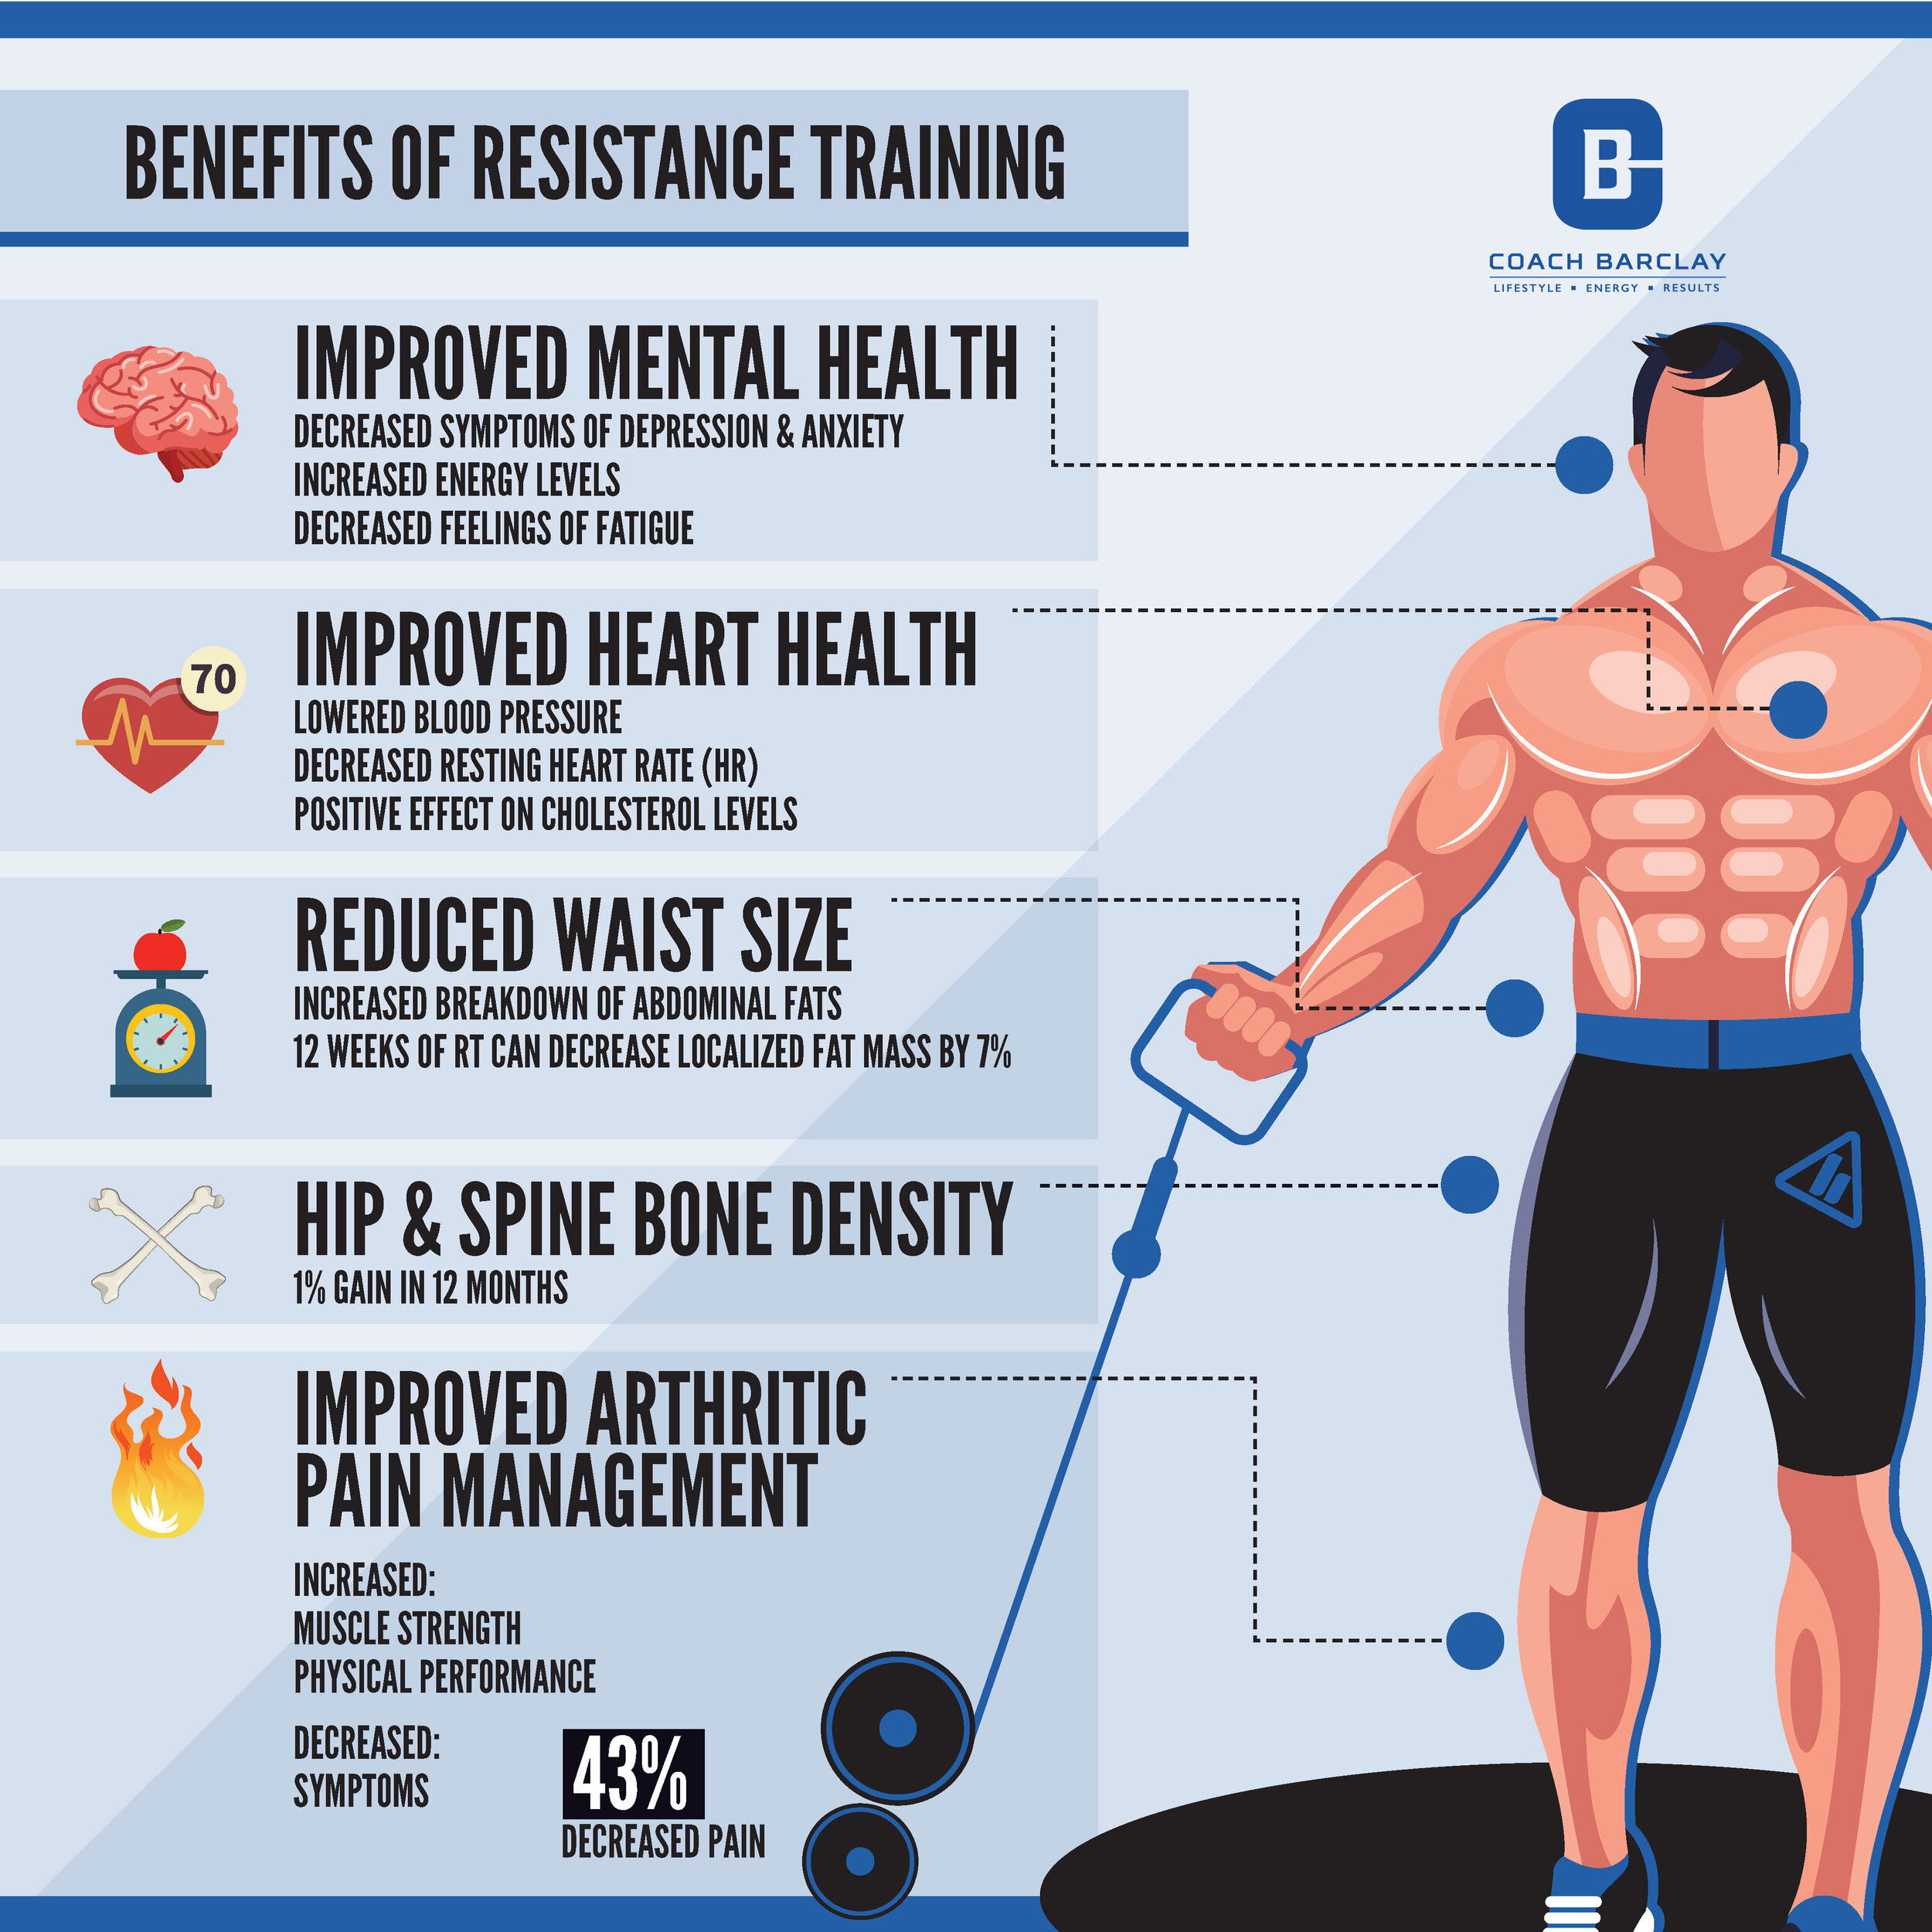 BENEFITS OF RESISTANCE TRAINING — Coach Barclay